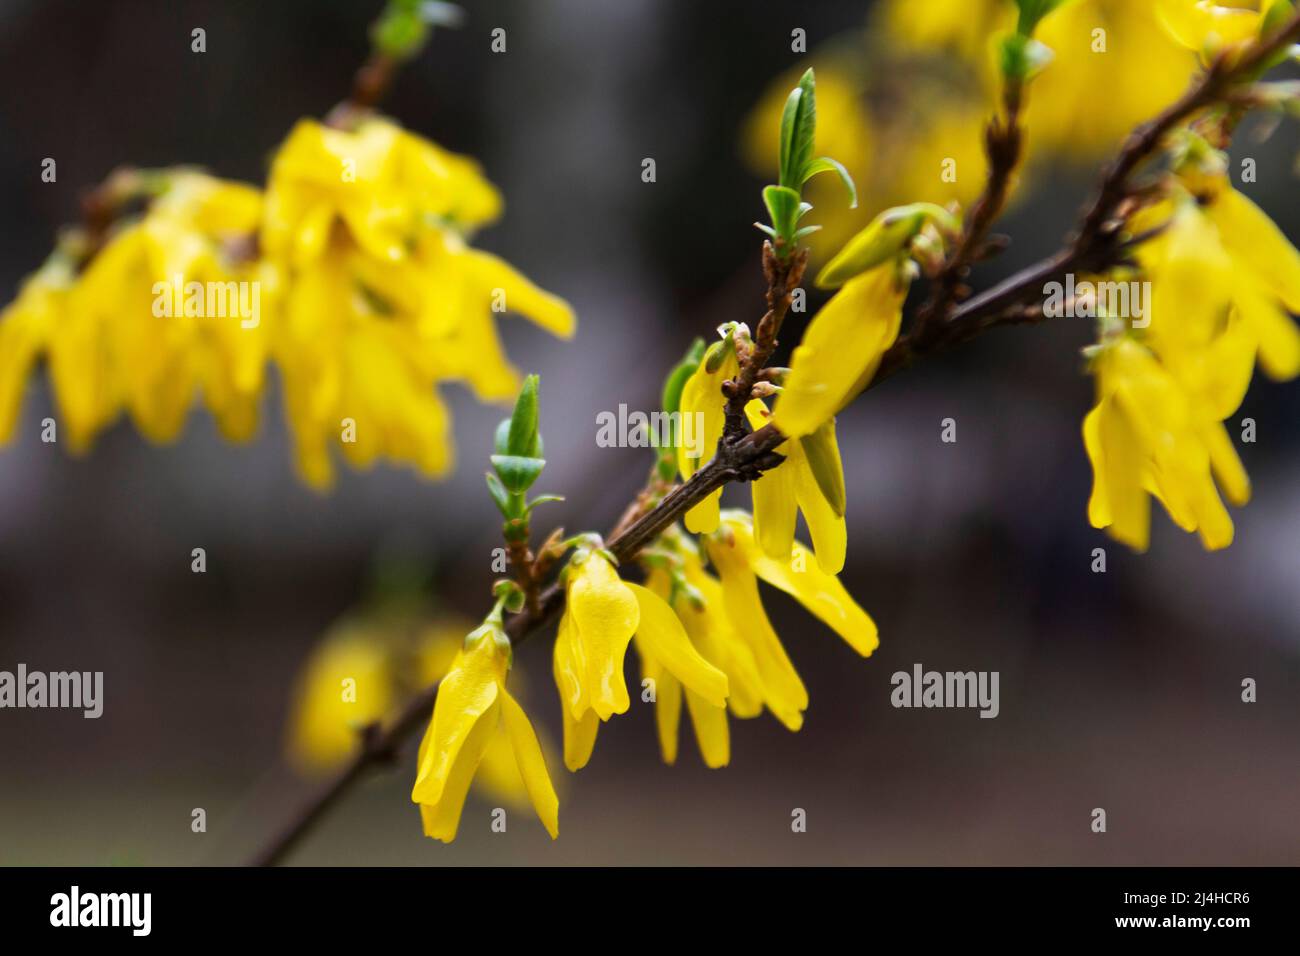 Branches of a flowering forsythia shrub in a city park. Stock Photo